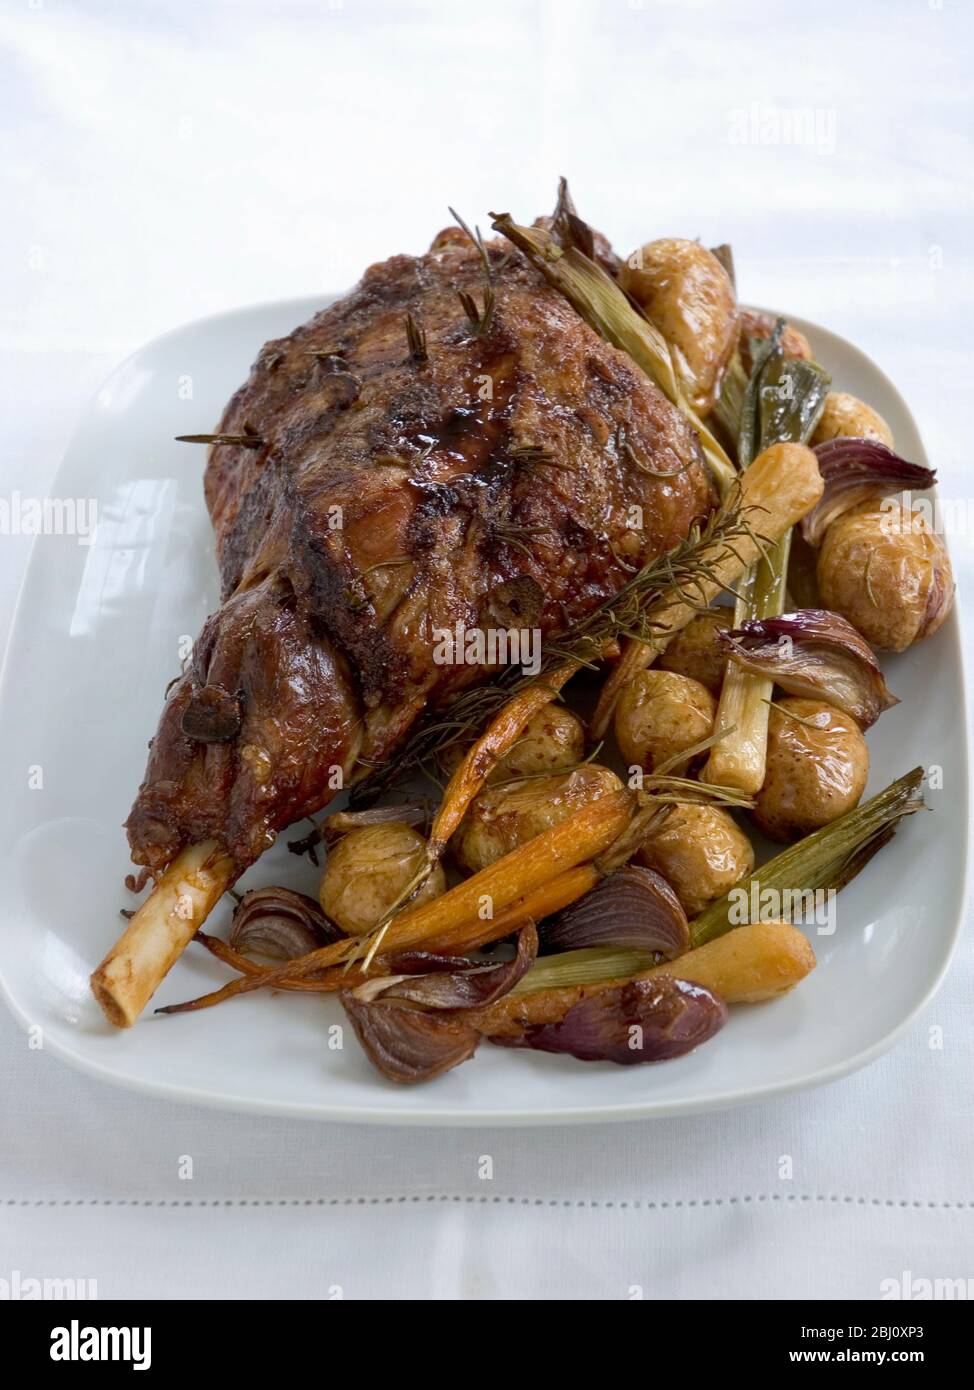 Leg of lamb on serving platter with roast new potatoes in their skins. - Stock Photo